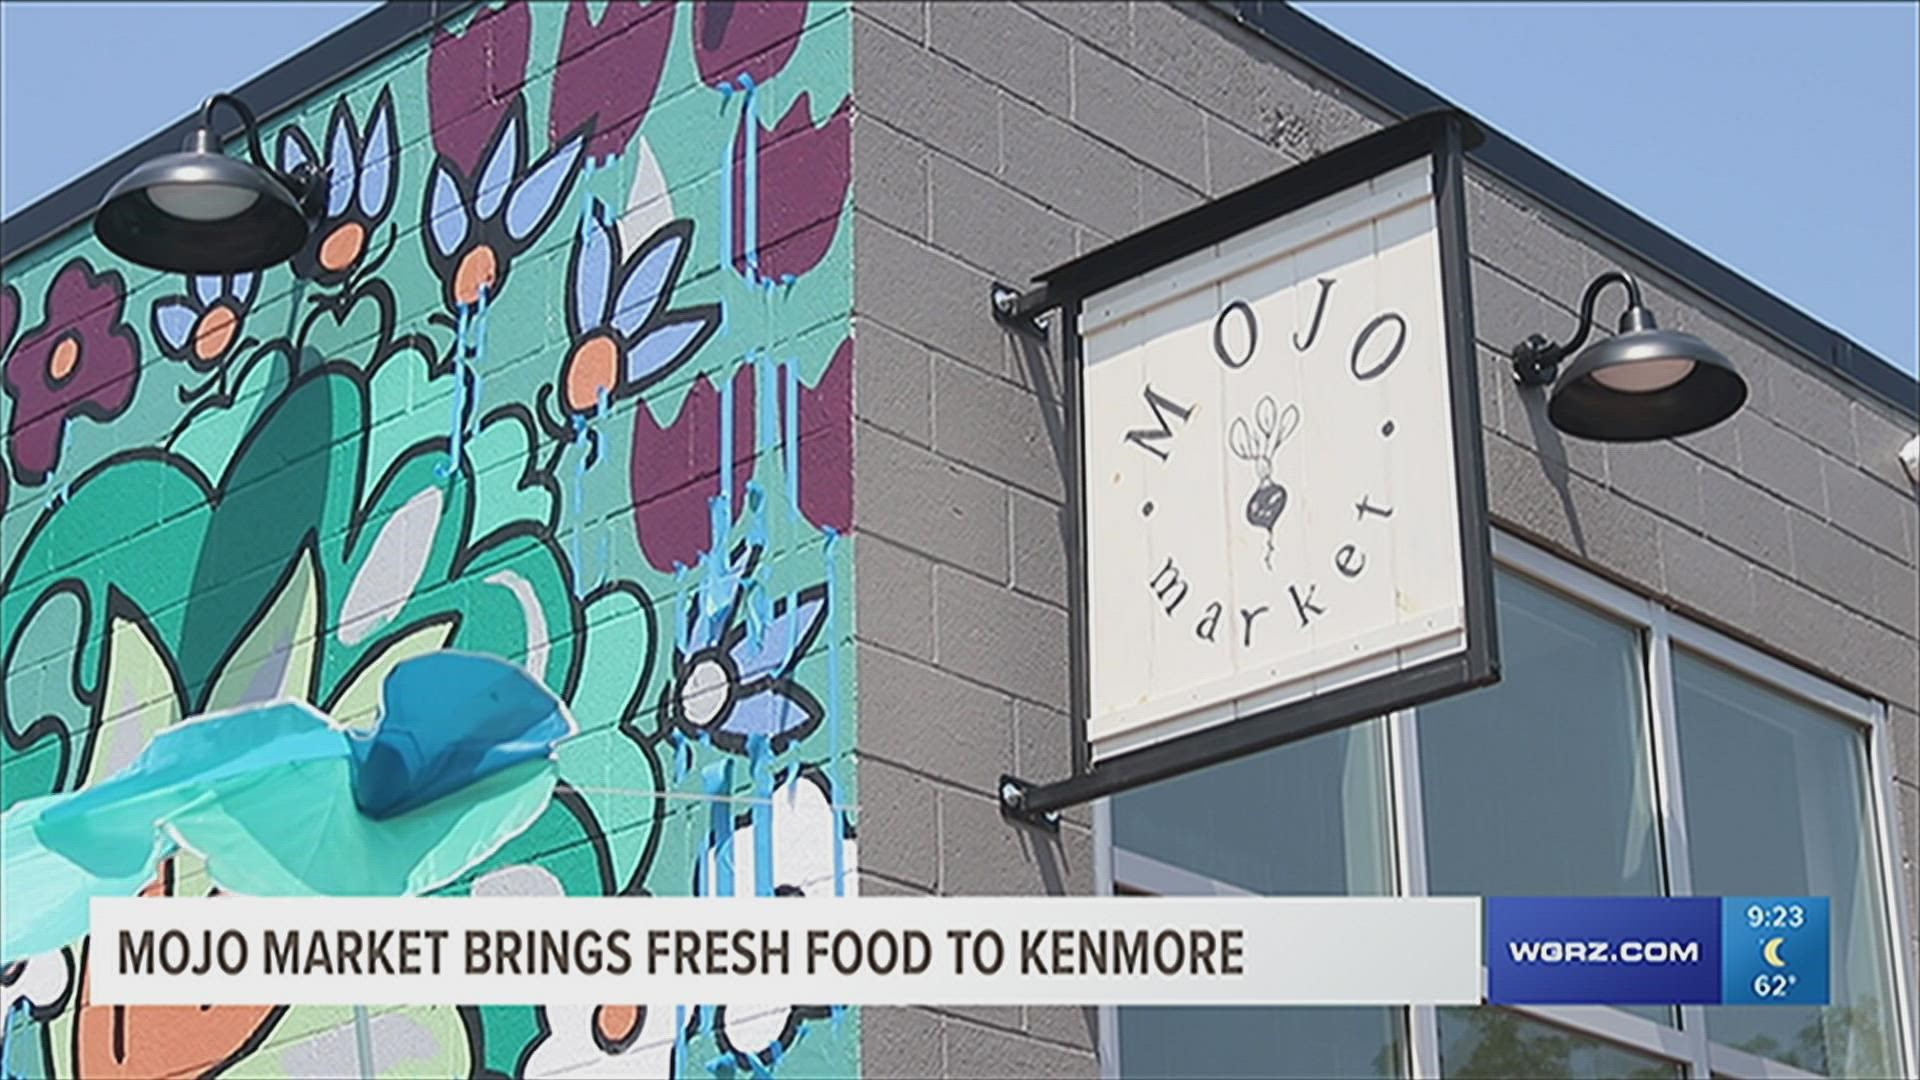 Mojo Market brings fresh food to Kenmore and 1st public art mural to the village